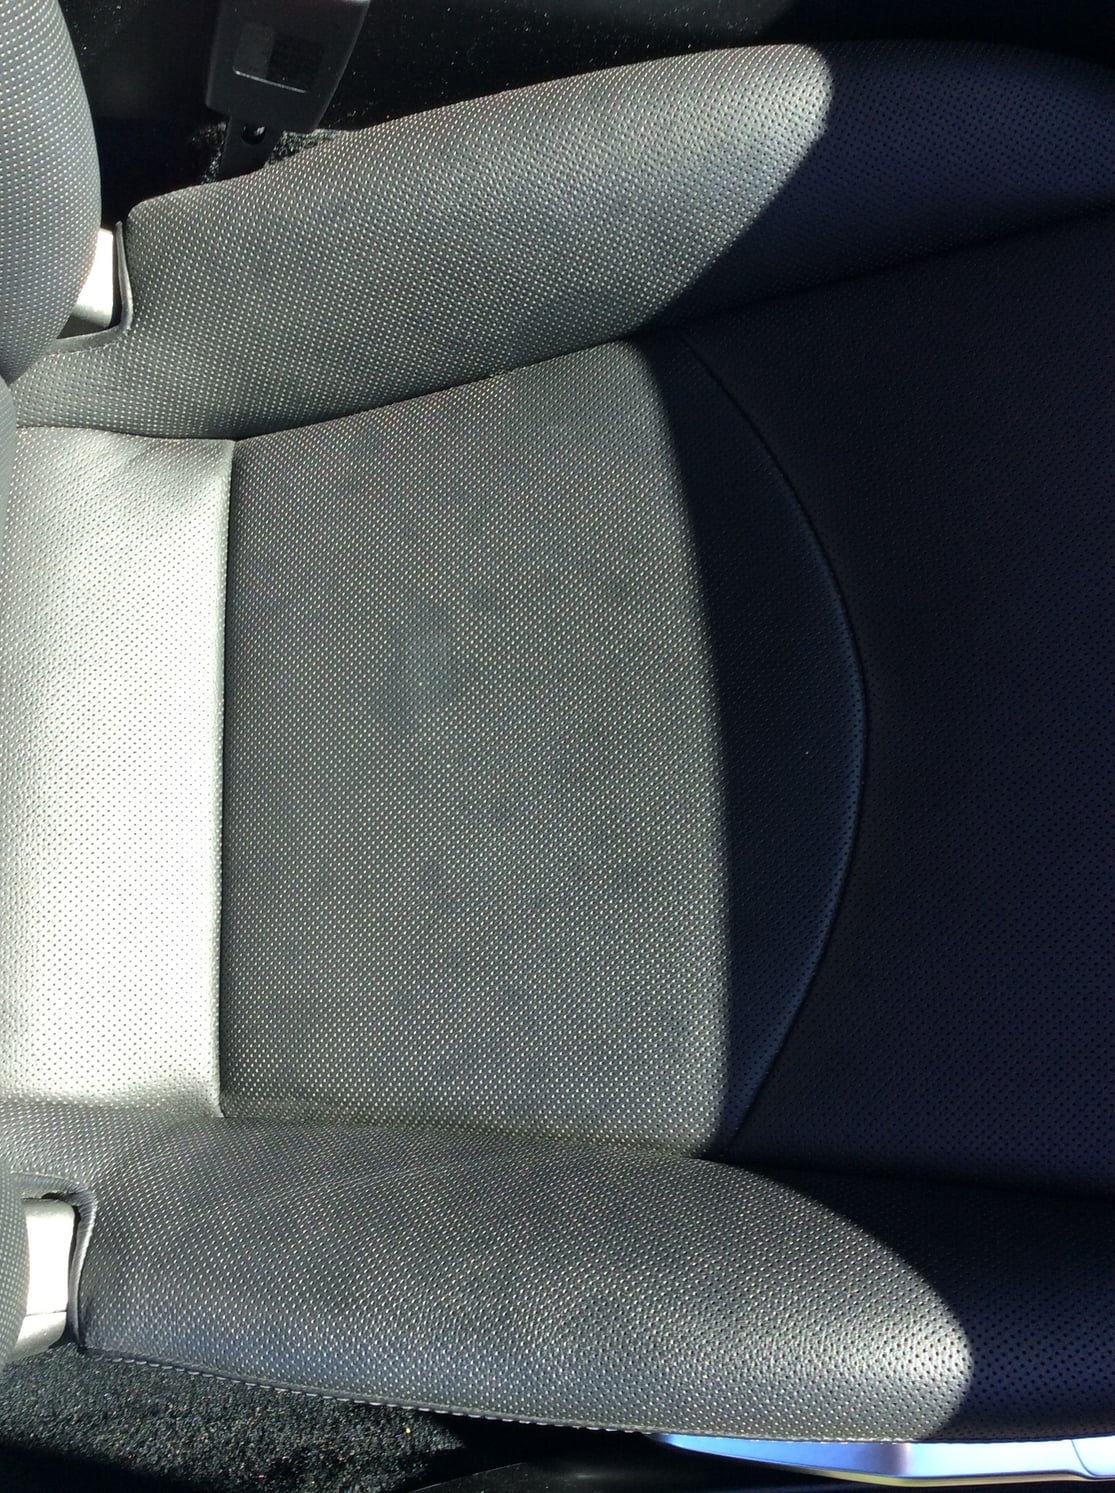 Perforated Leather: How to Clean Leather Seats with Holes